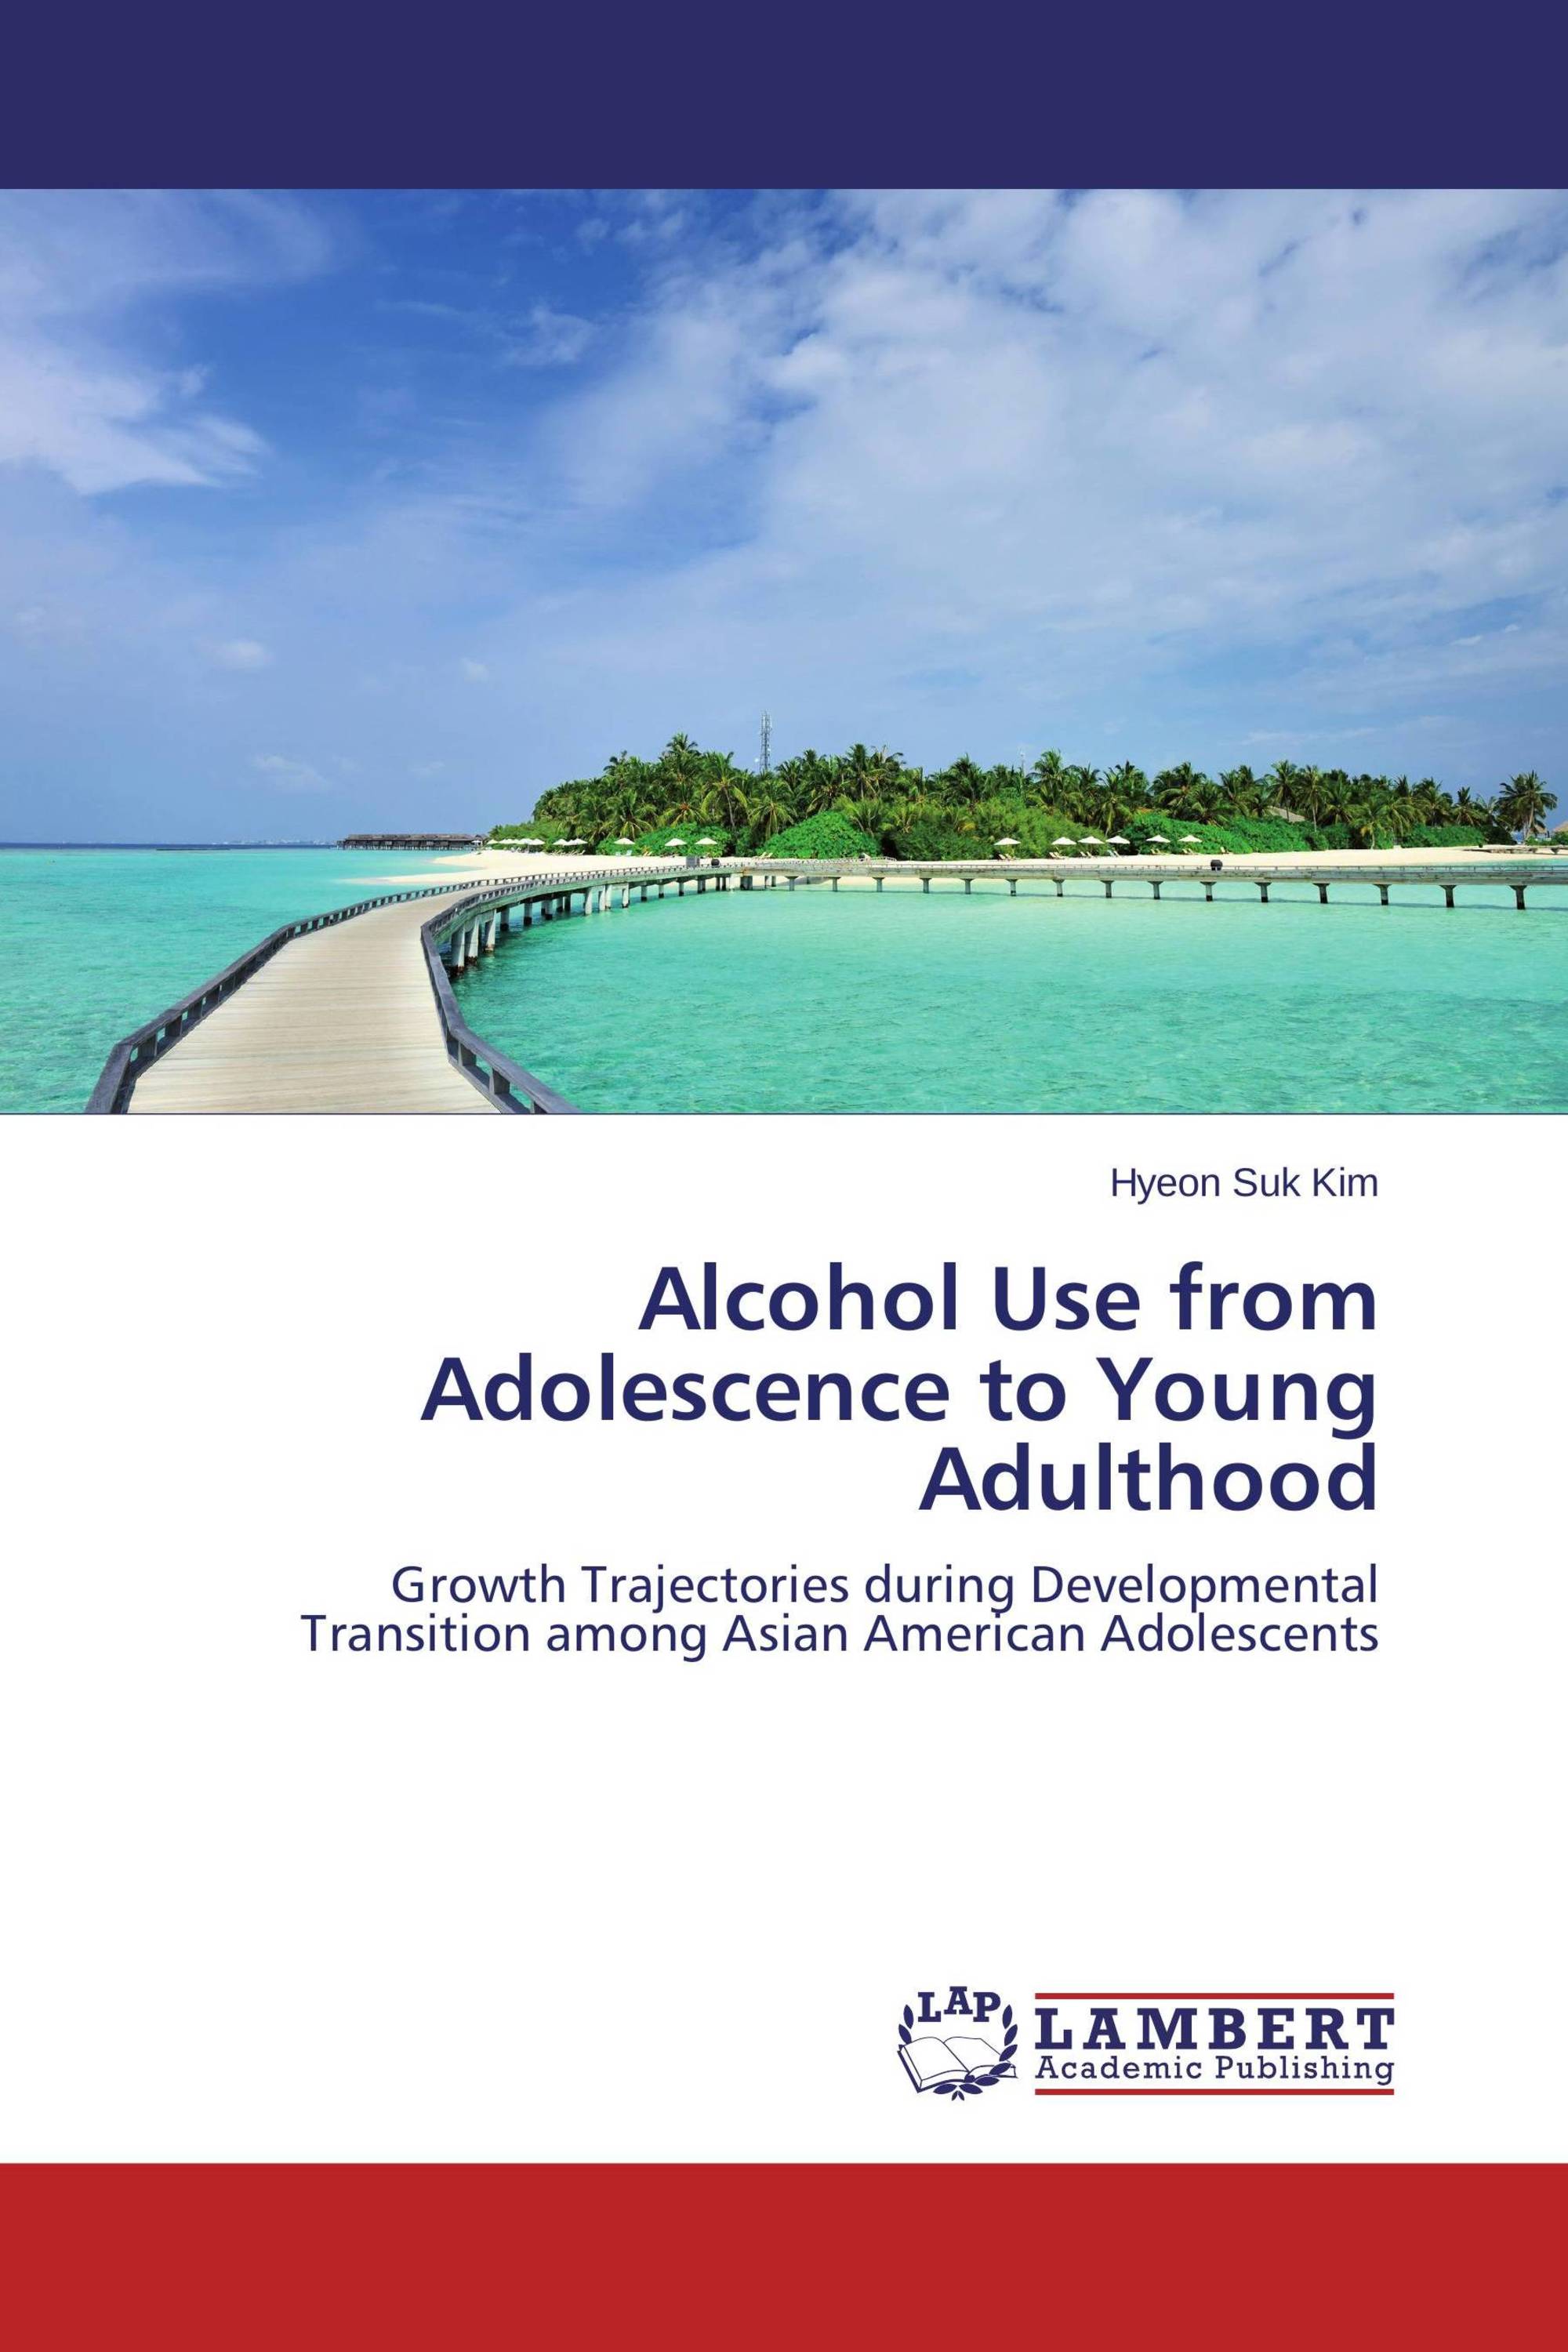 Alcohol Use Initiation Among Adolescents